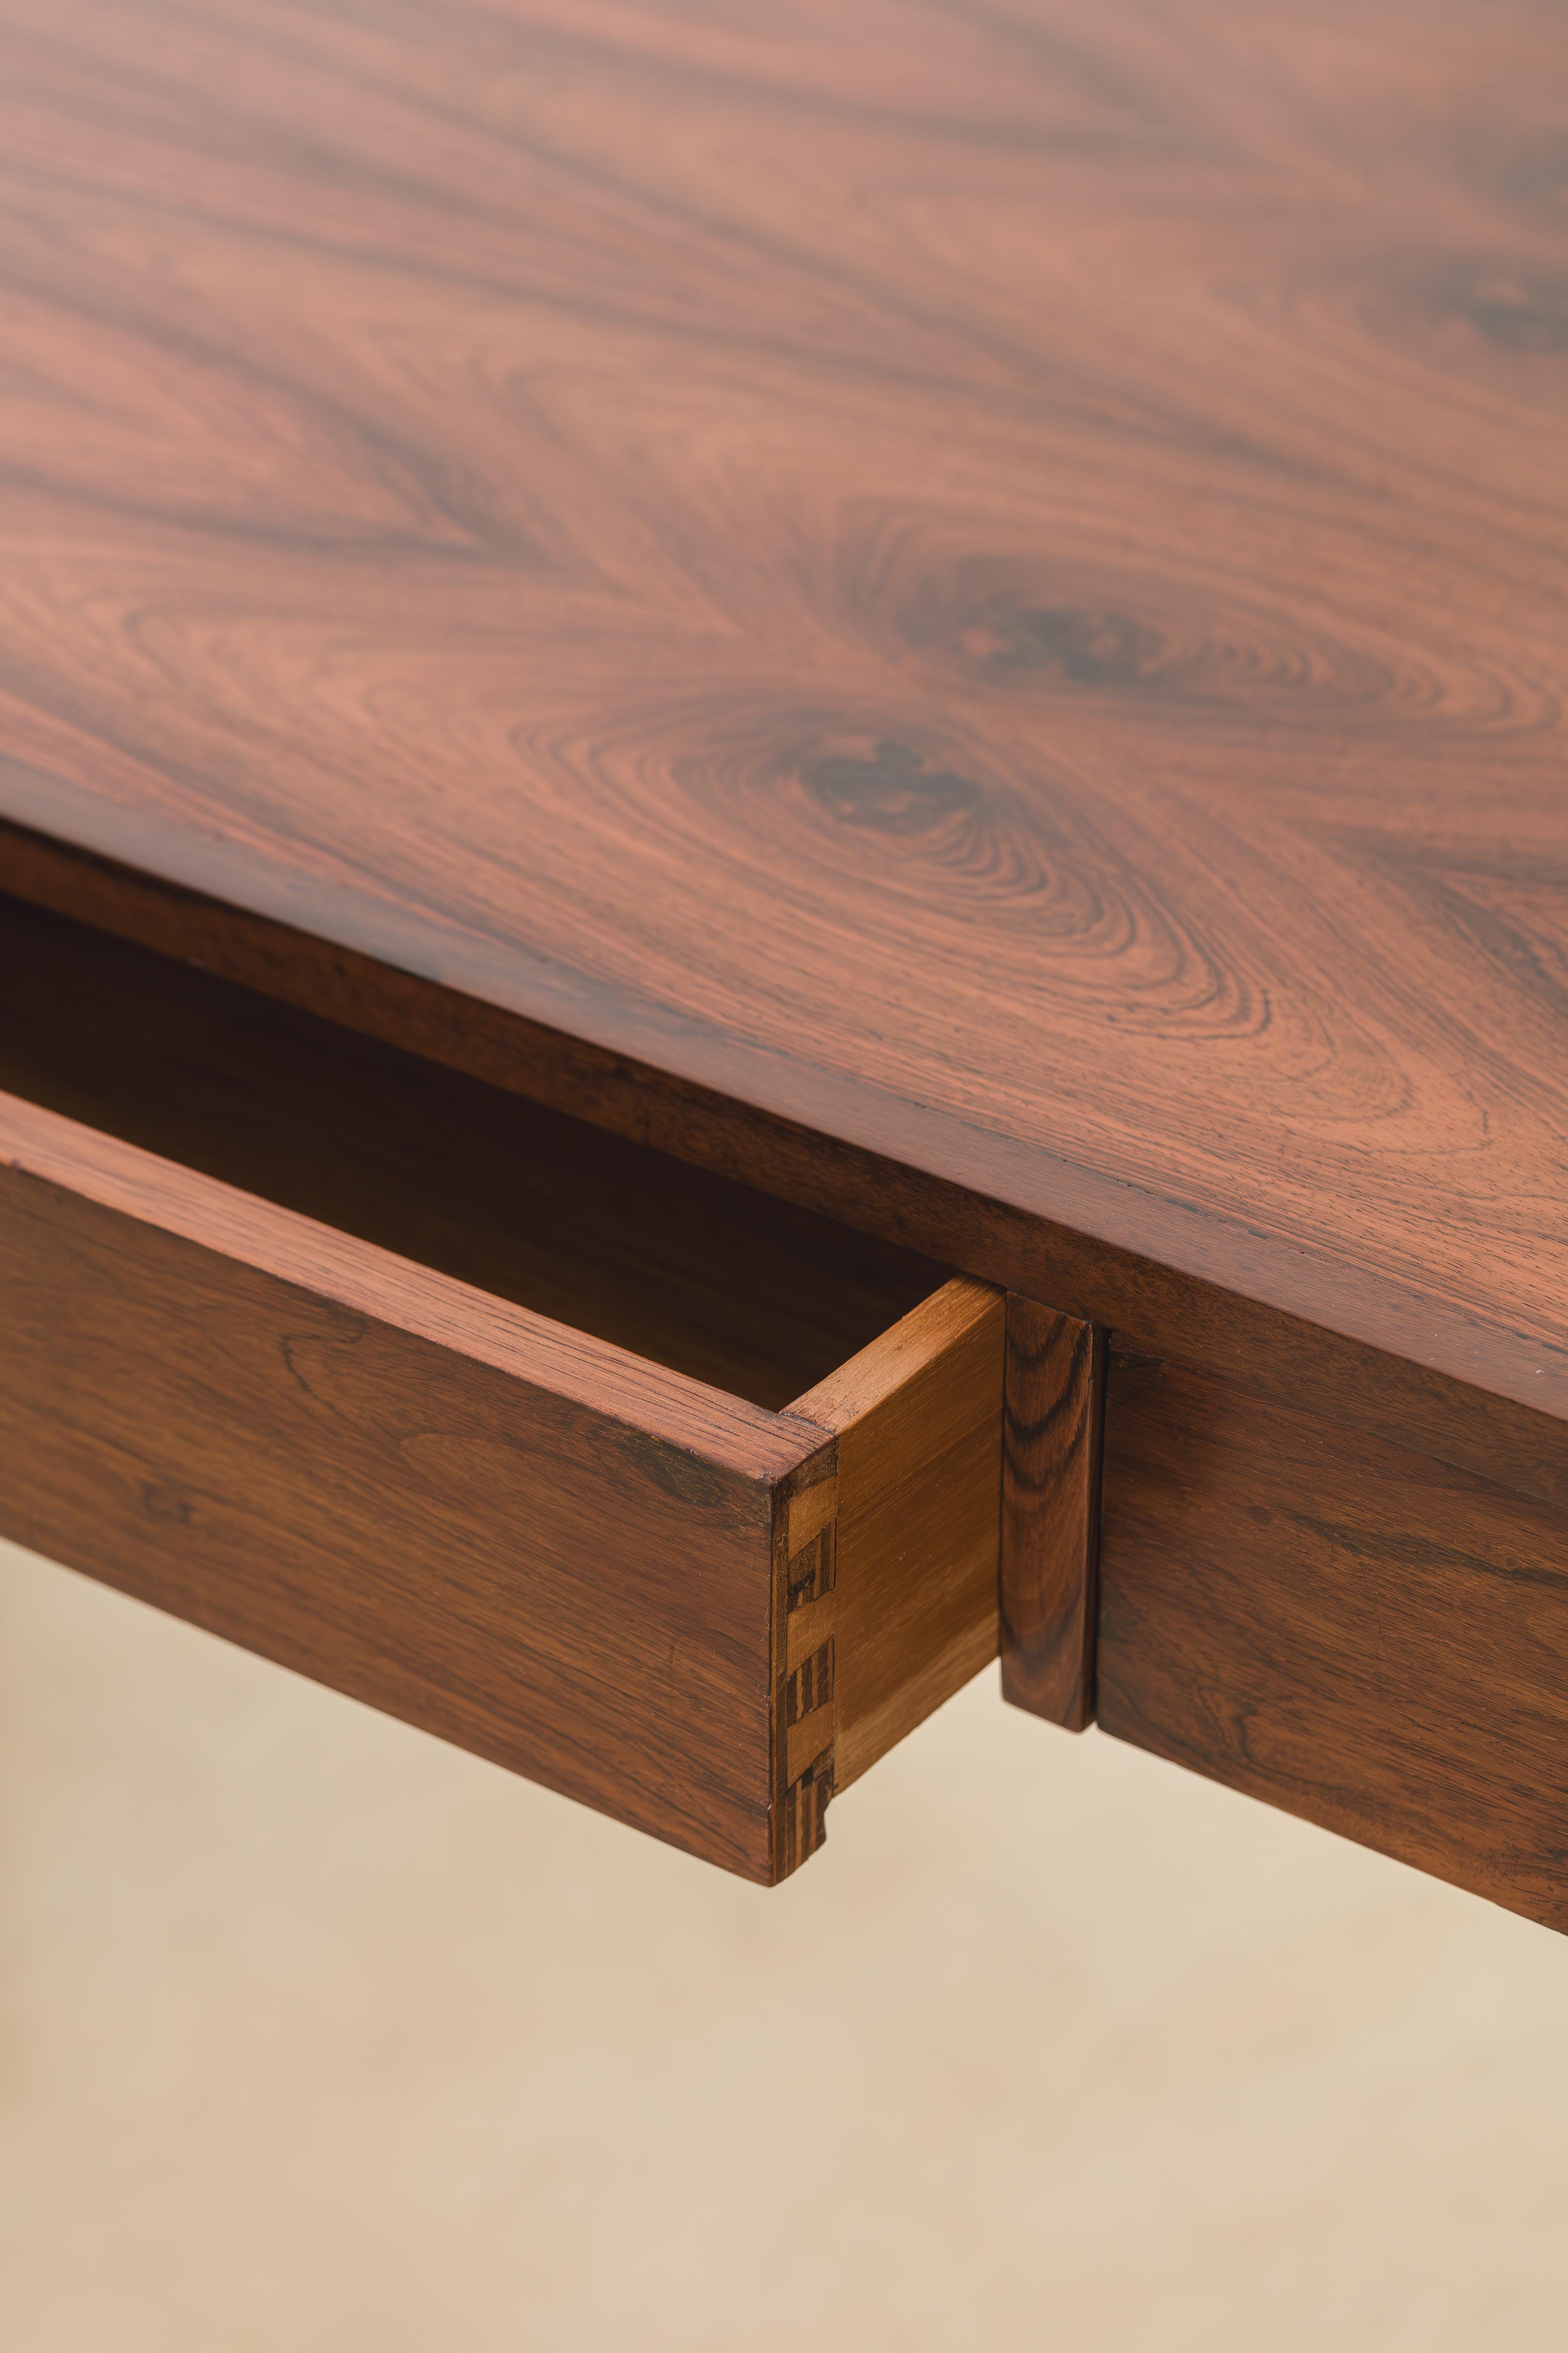 Rosewood Desk by Joaquim Tenreiro, Bloch Editors, 1960s, Brazilian Midcentury In Good Condition For Sale In New York, NY